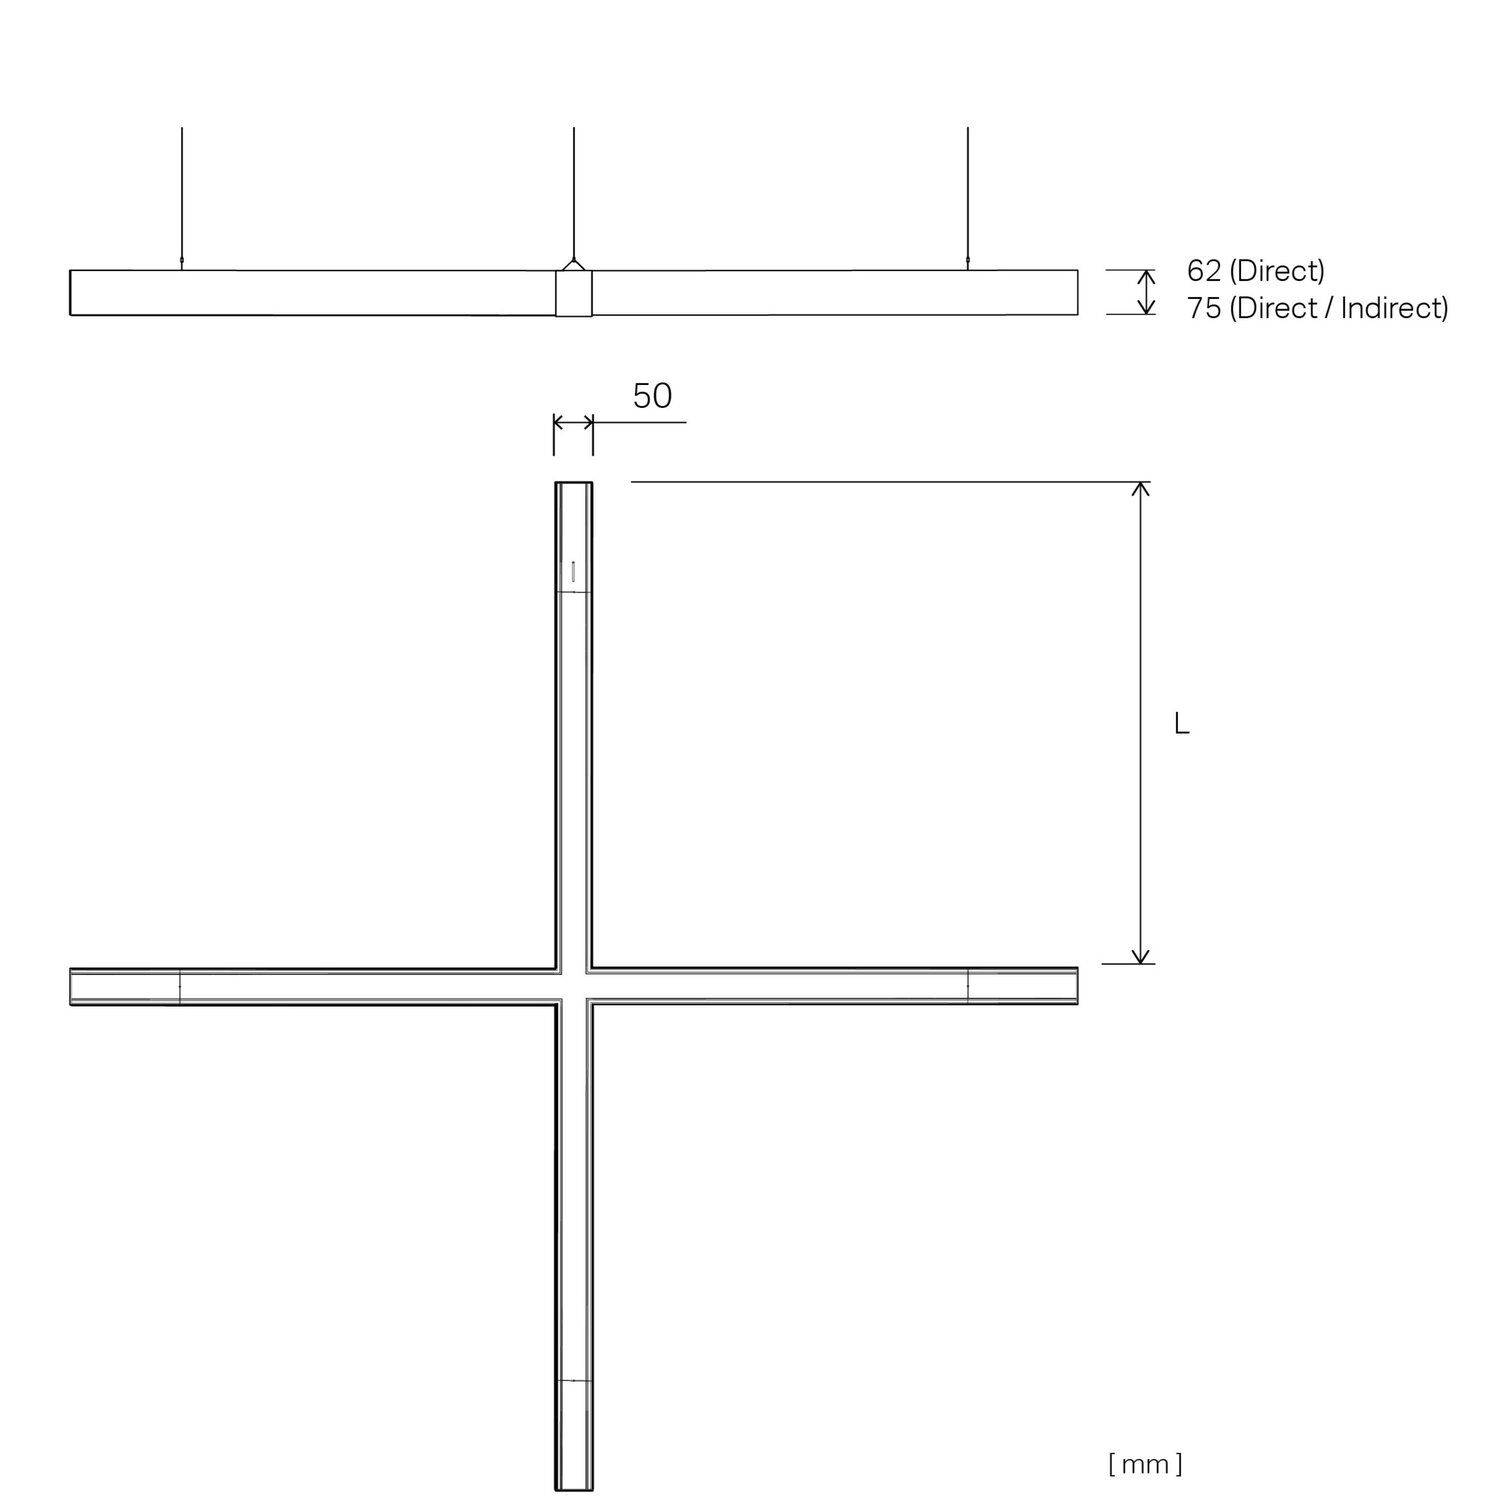 tormes_suspended_technical_drawing